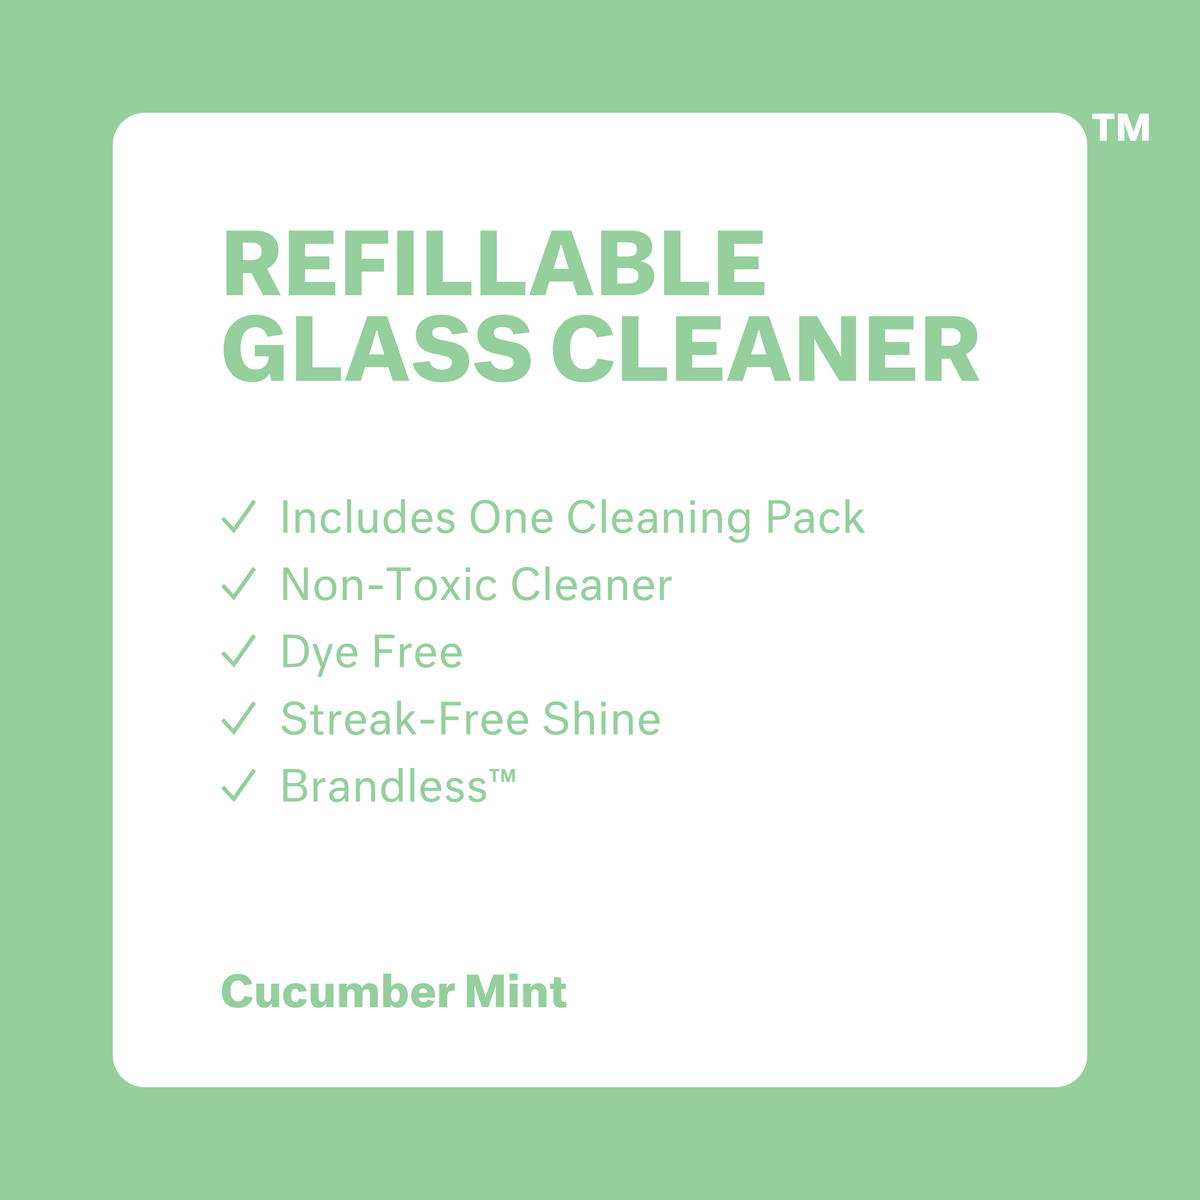 Refillable Glass Cleaner, Cucumber Mint. Includes one cleaning pack. Non-toxic cleaners. Dye free. Streak-free shine. Brandless.